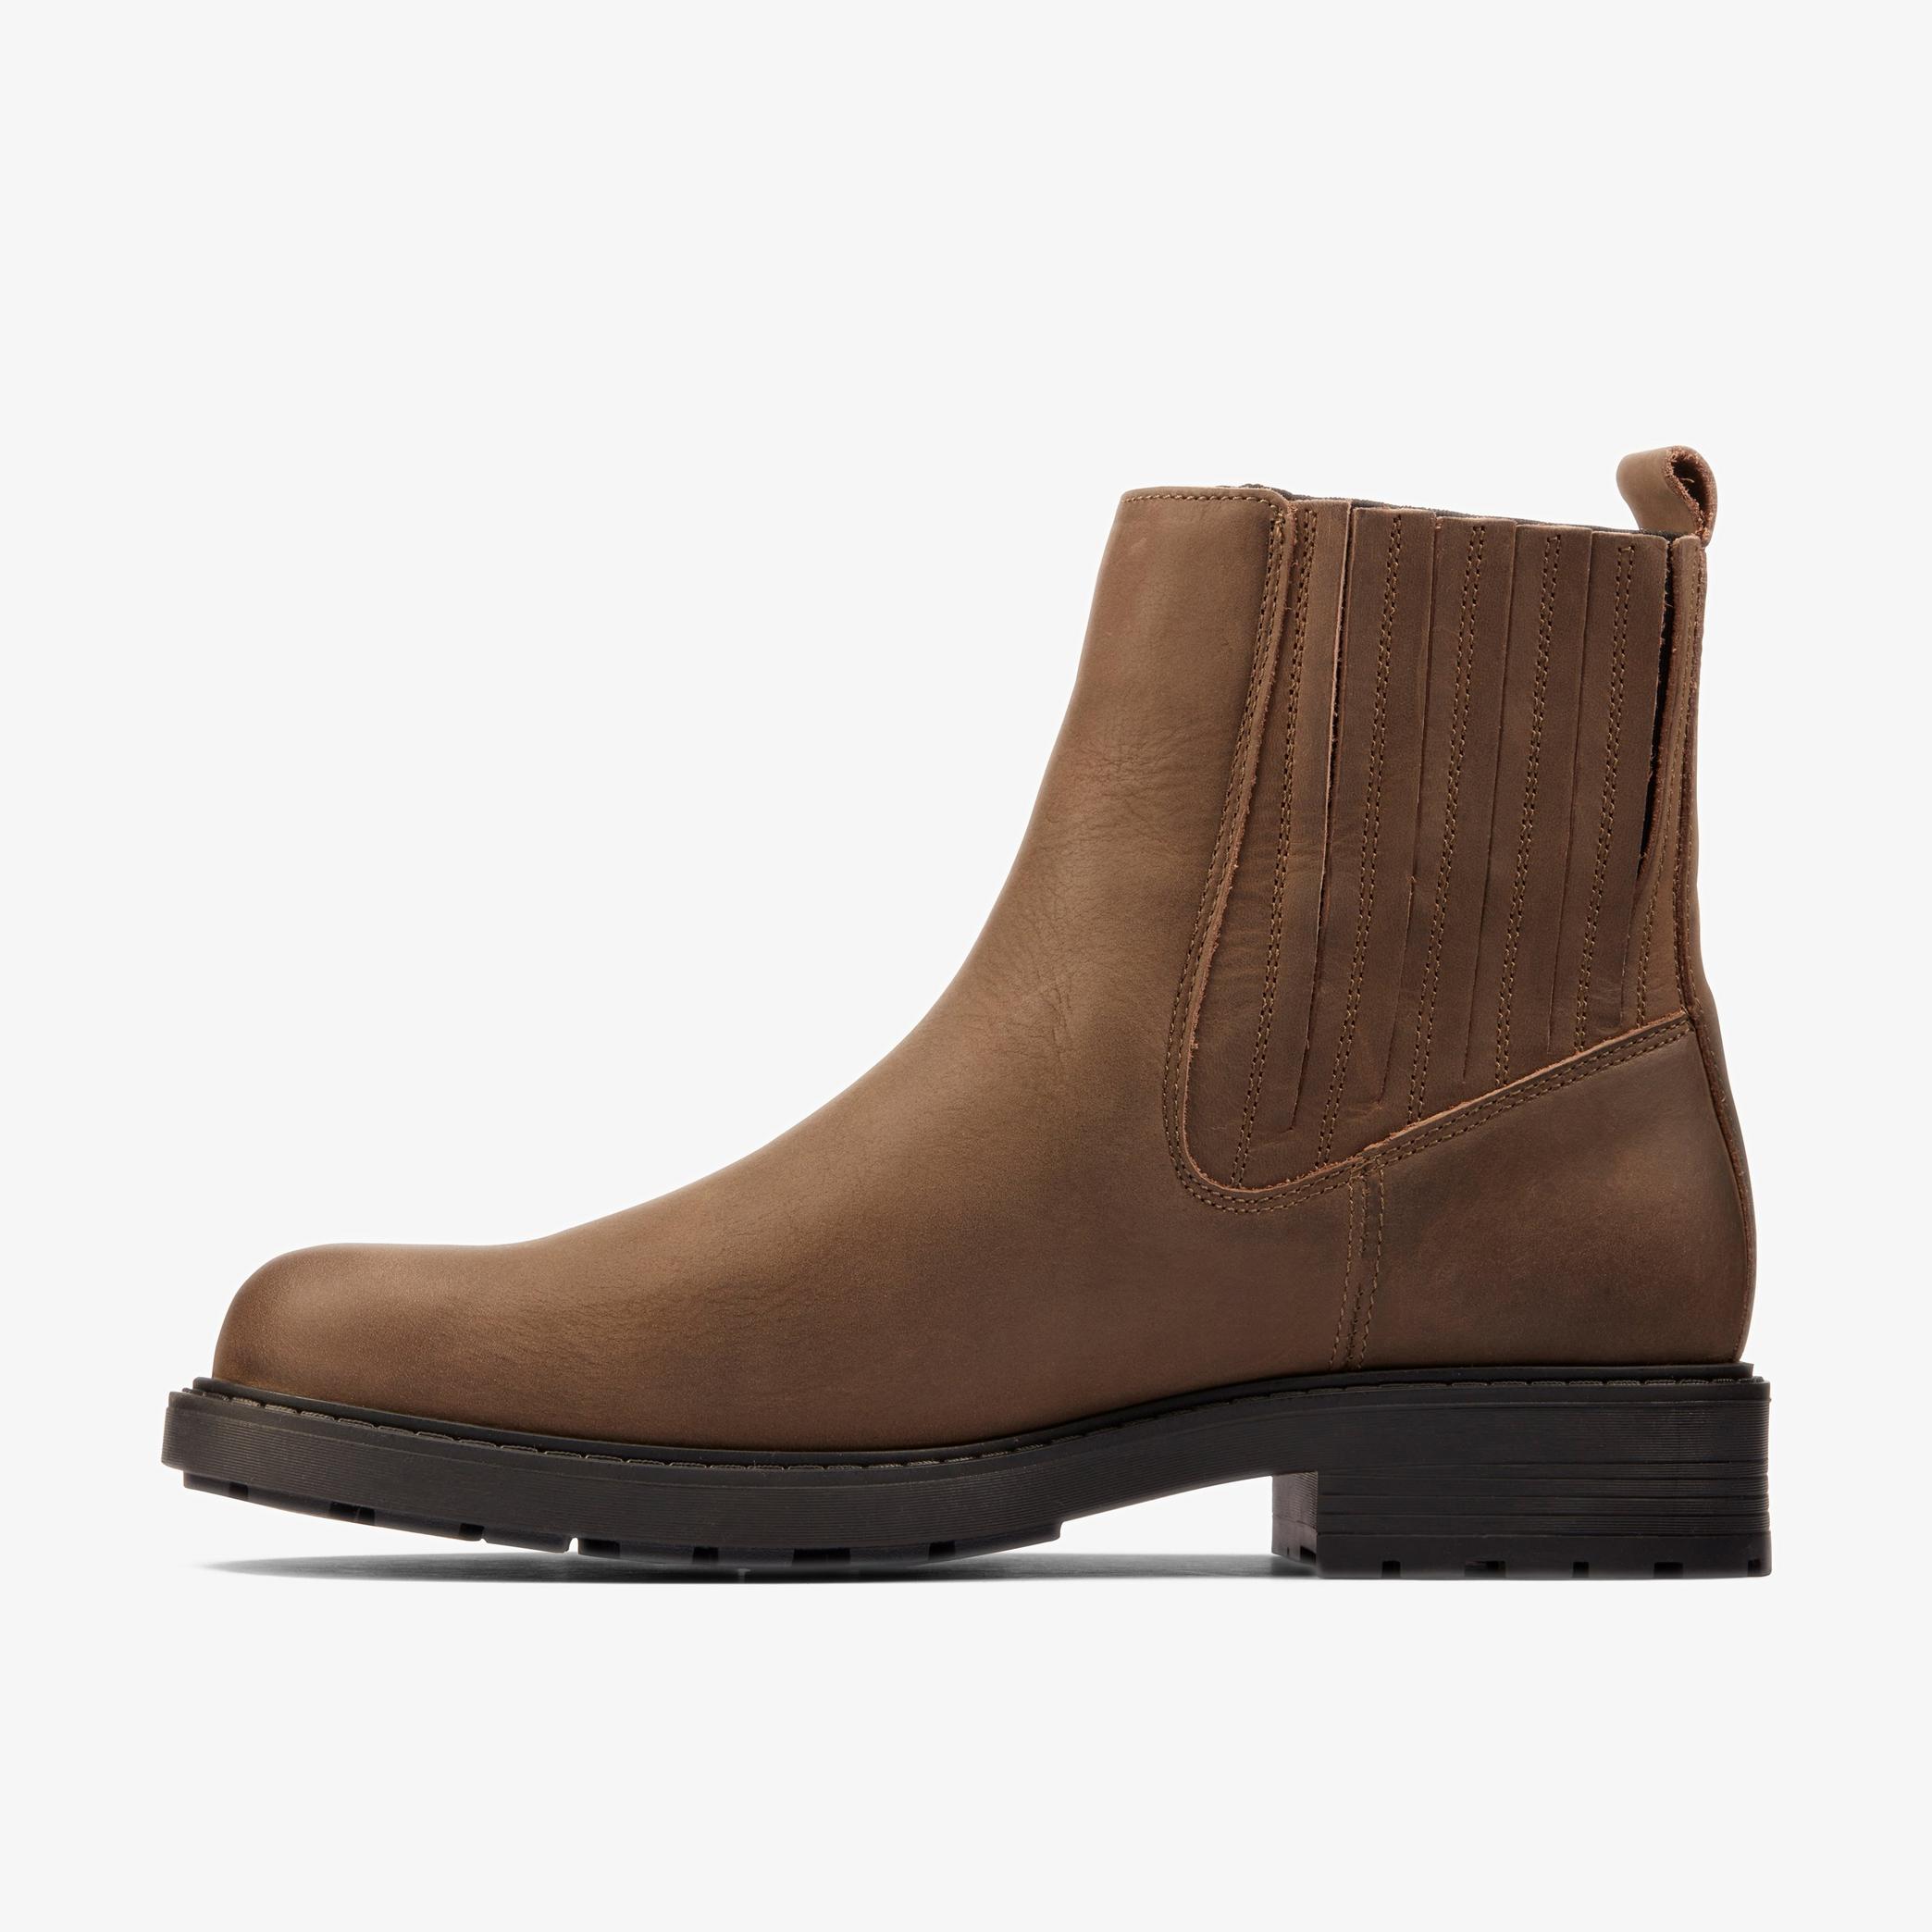 Orinoco2 Mid Brown Snuff Ankle Boots, view 2 of 6